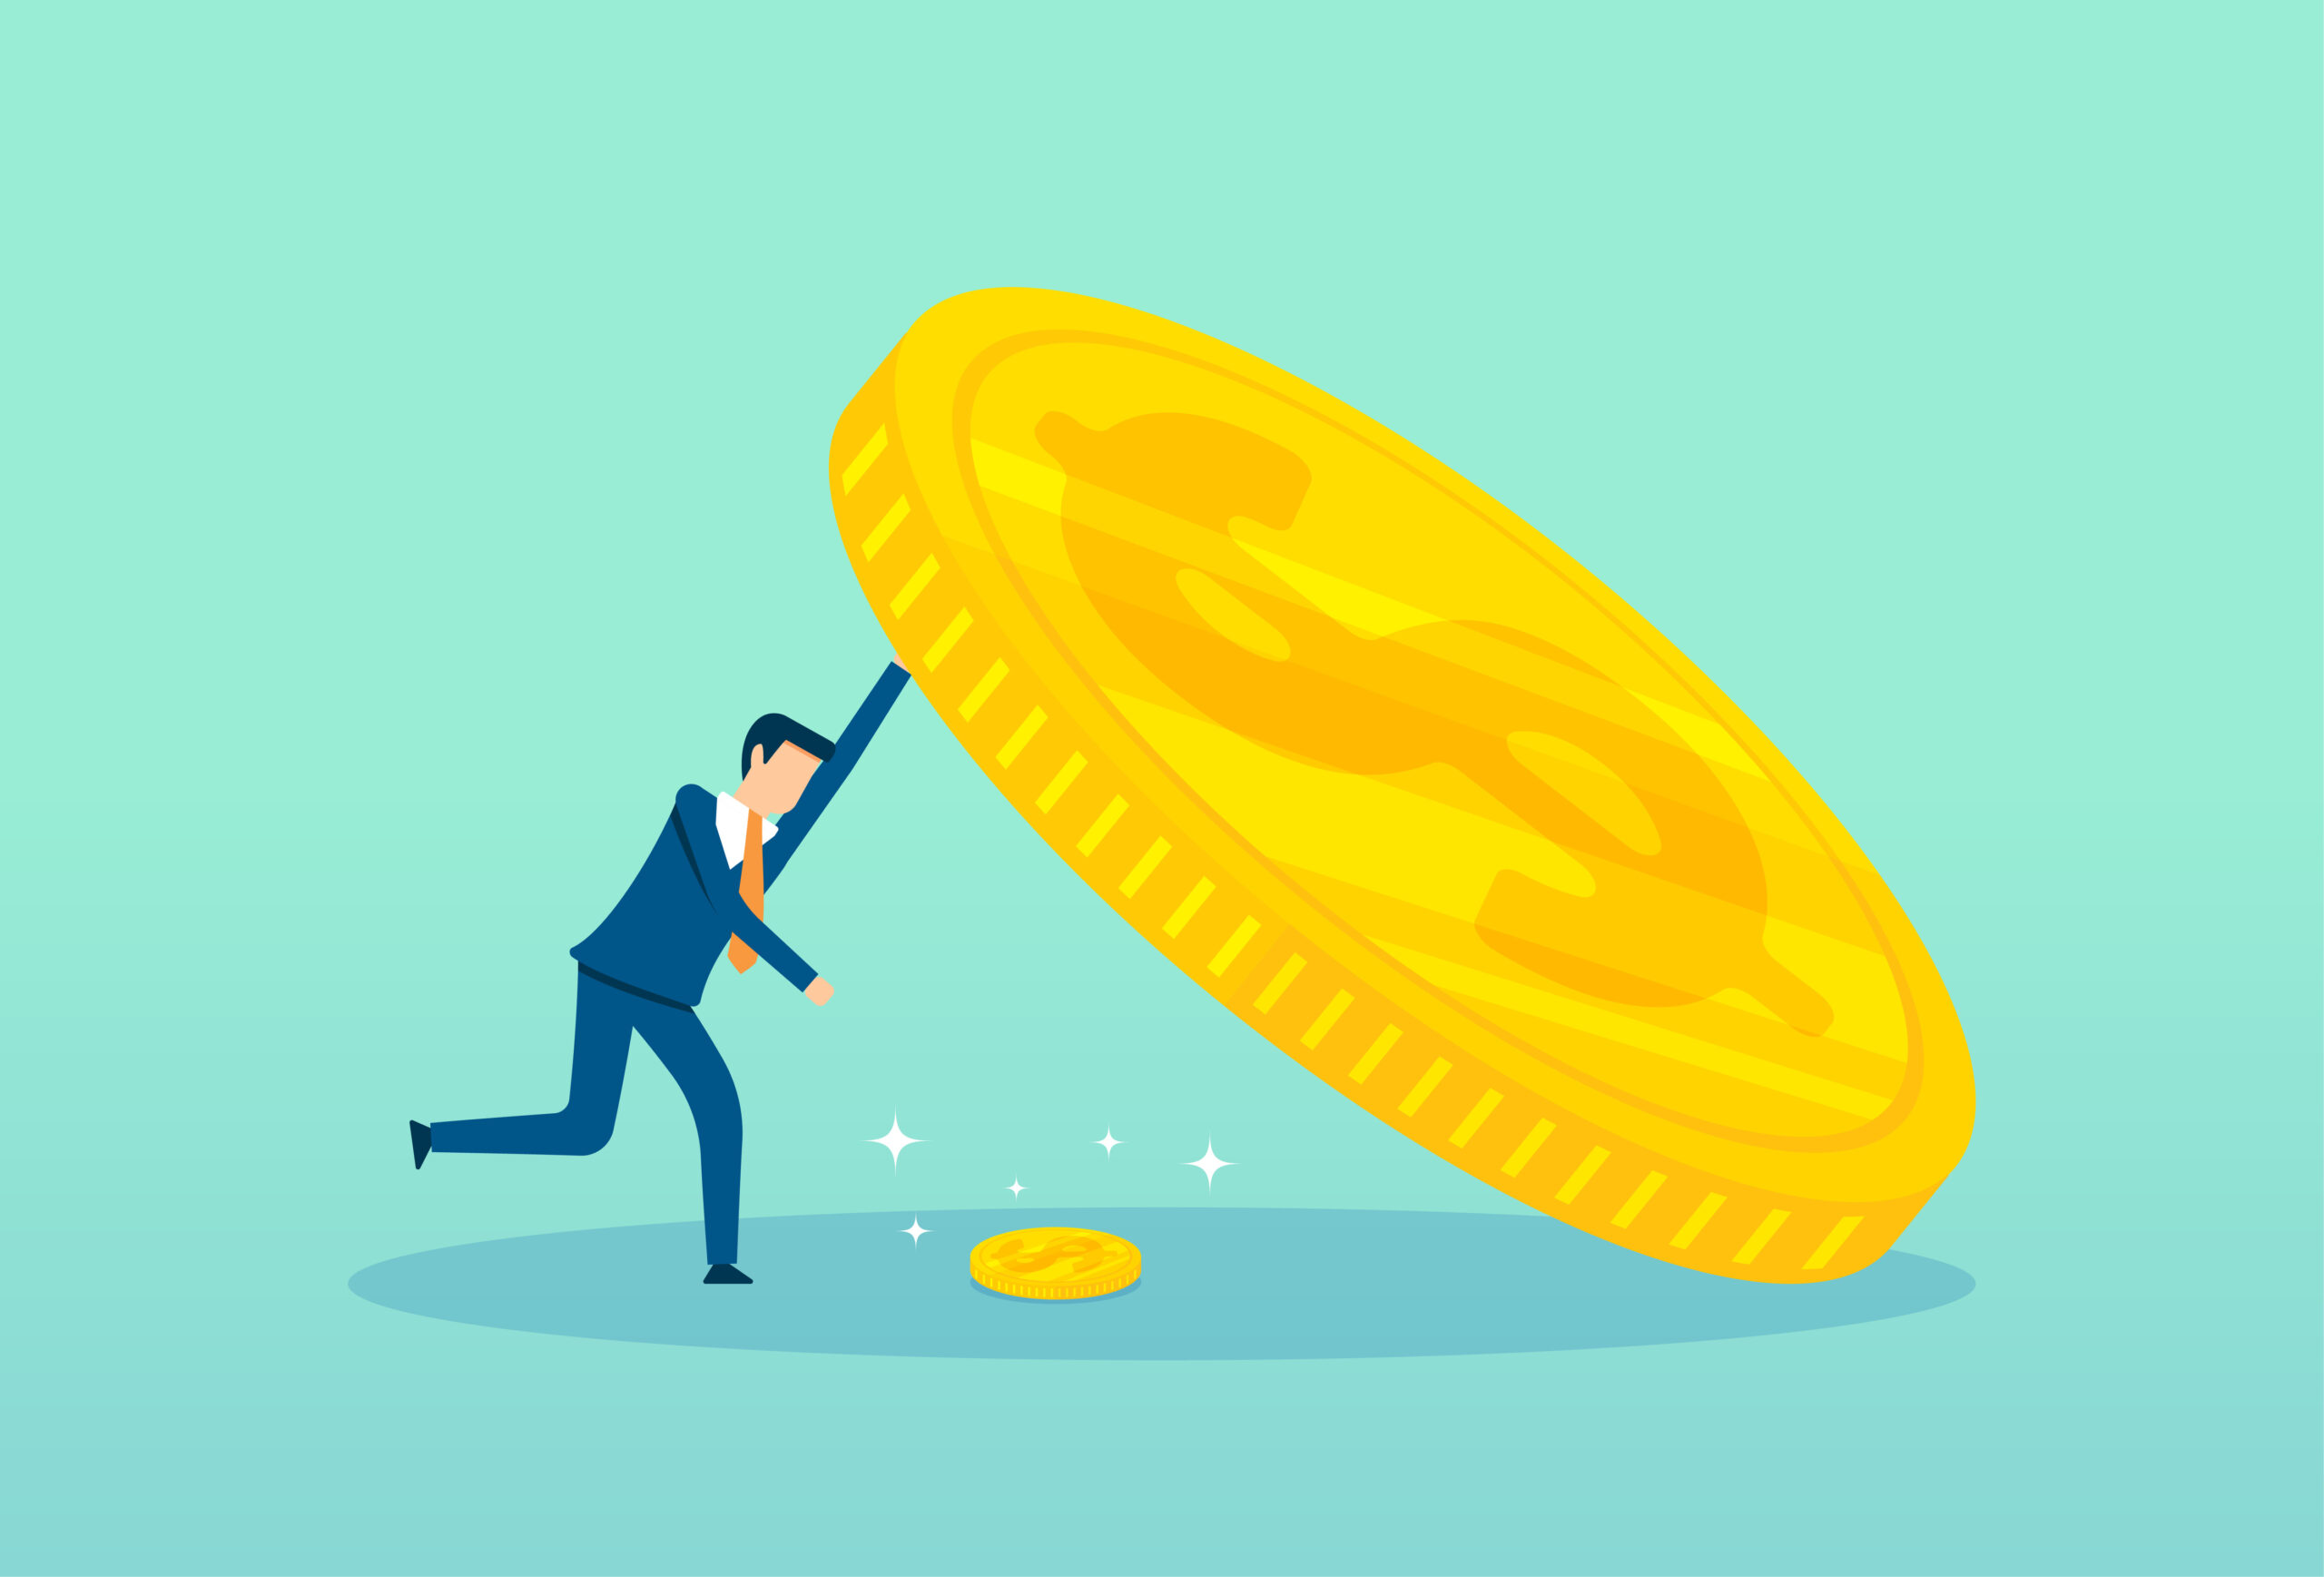 Vector illustration of a man in a suit lifting up a large coin to reach for a small coin that sits underneath. [Are Your Asking Amounts Soul-Sucking?]